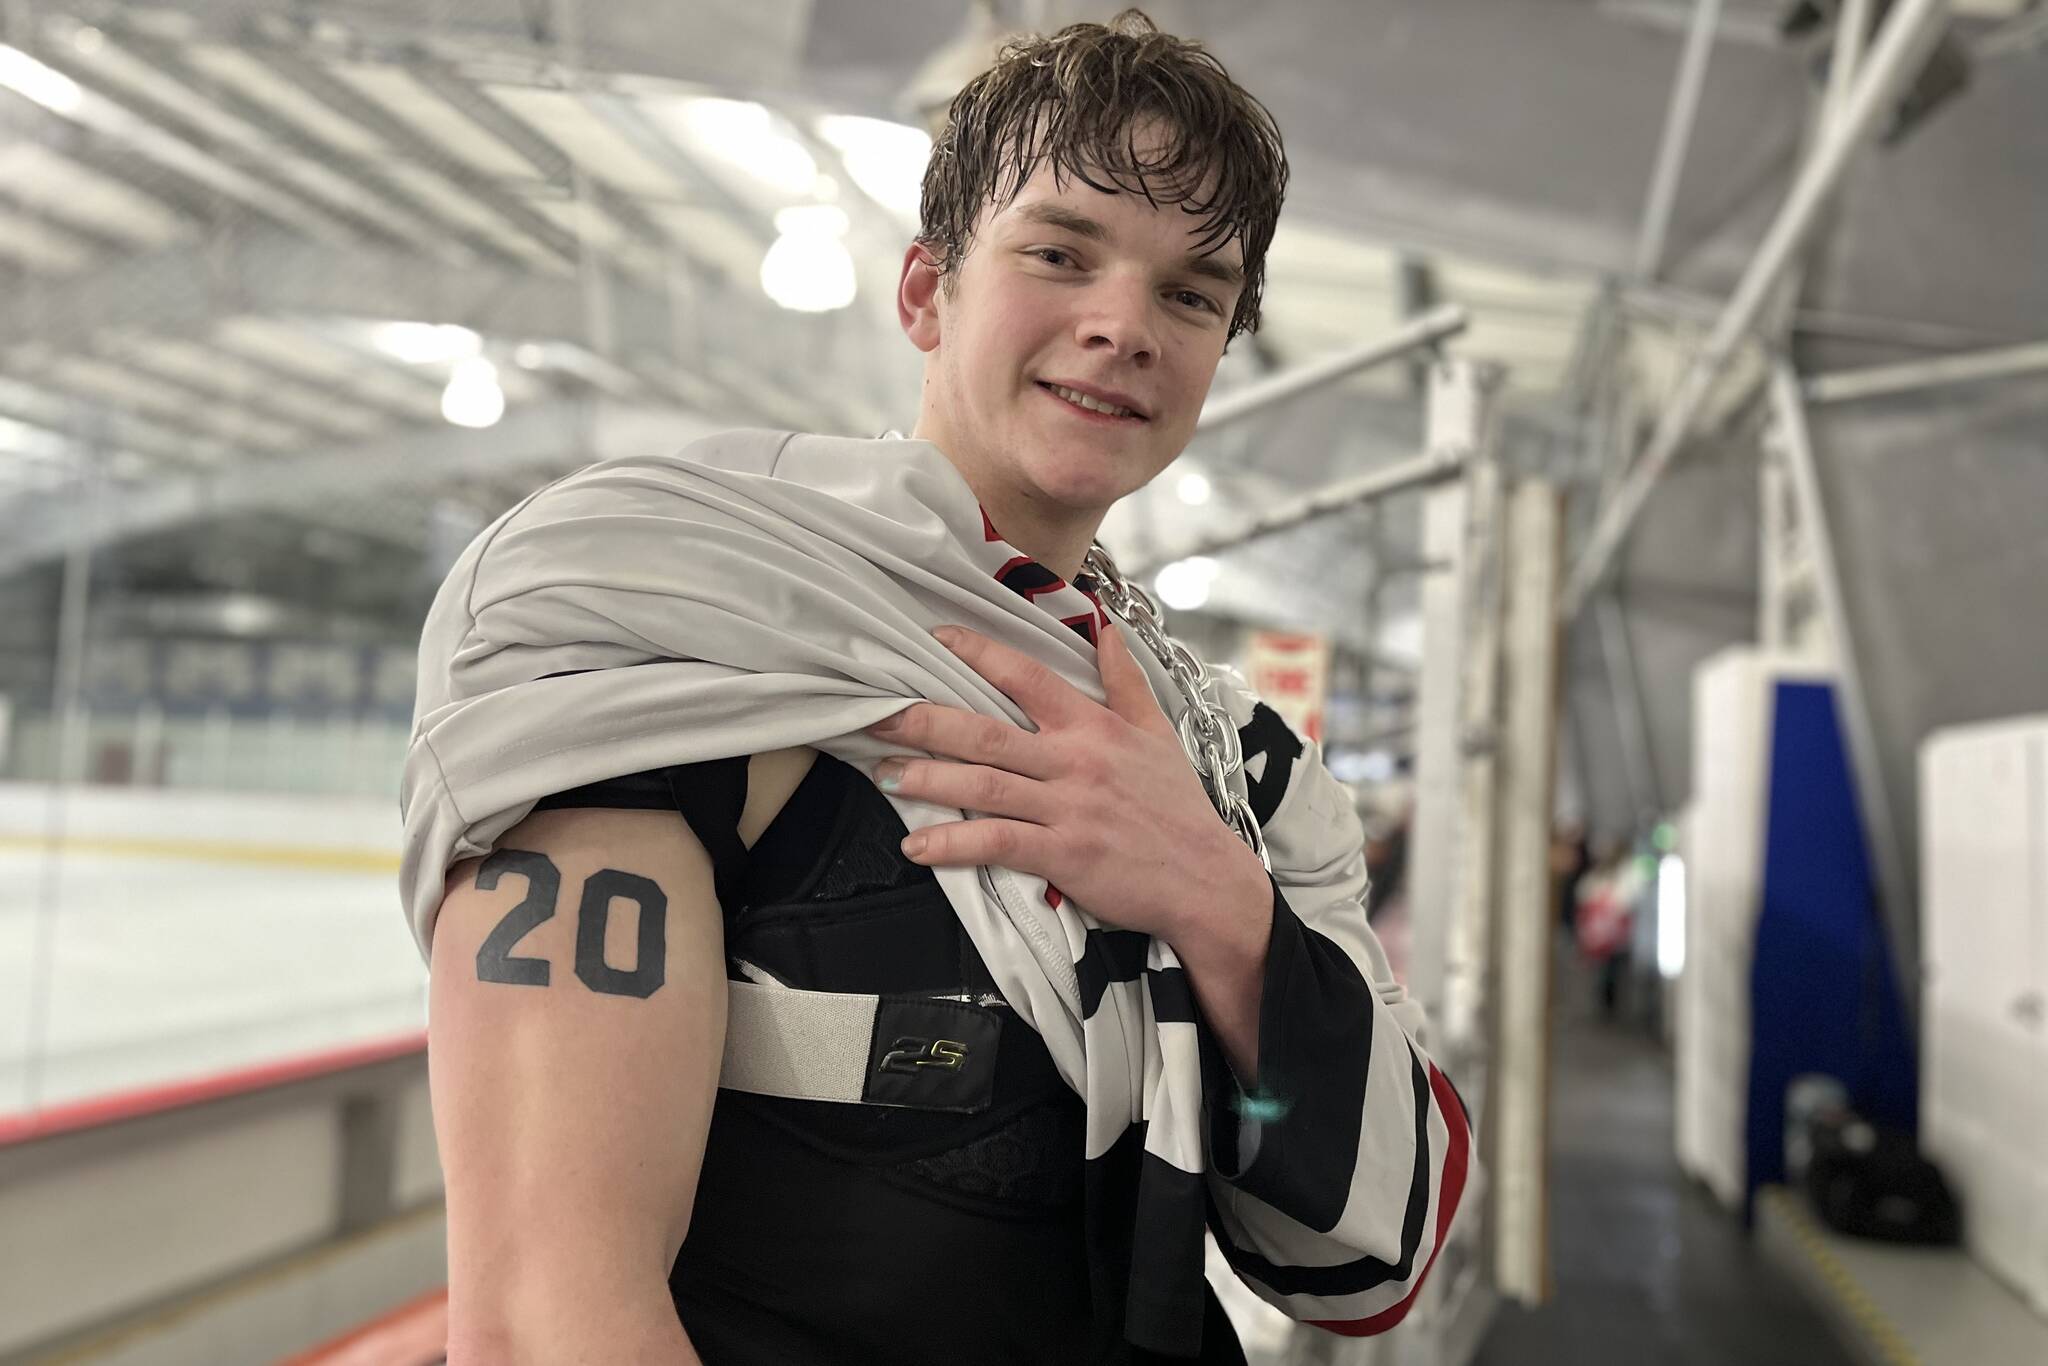 JDHS senior Brandon Campbell shows his tattoo that pays tribute to his late brother Matthew at Treadwell Arena after a victory game against Tri-Valley High School. The 20 on Brandon’s arm matches Matthew’s jersey number, which was retired in a special ceremony during Saturday’s game. (Jonson Kuhn / Juneau Empire)